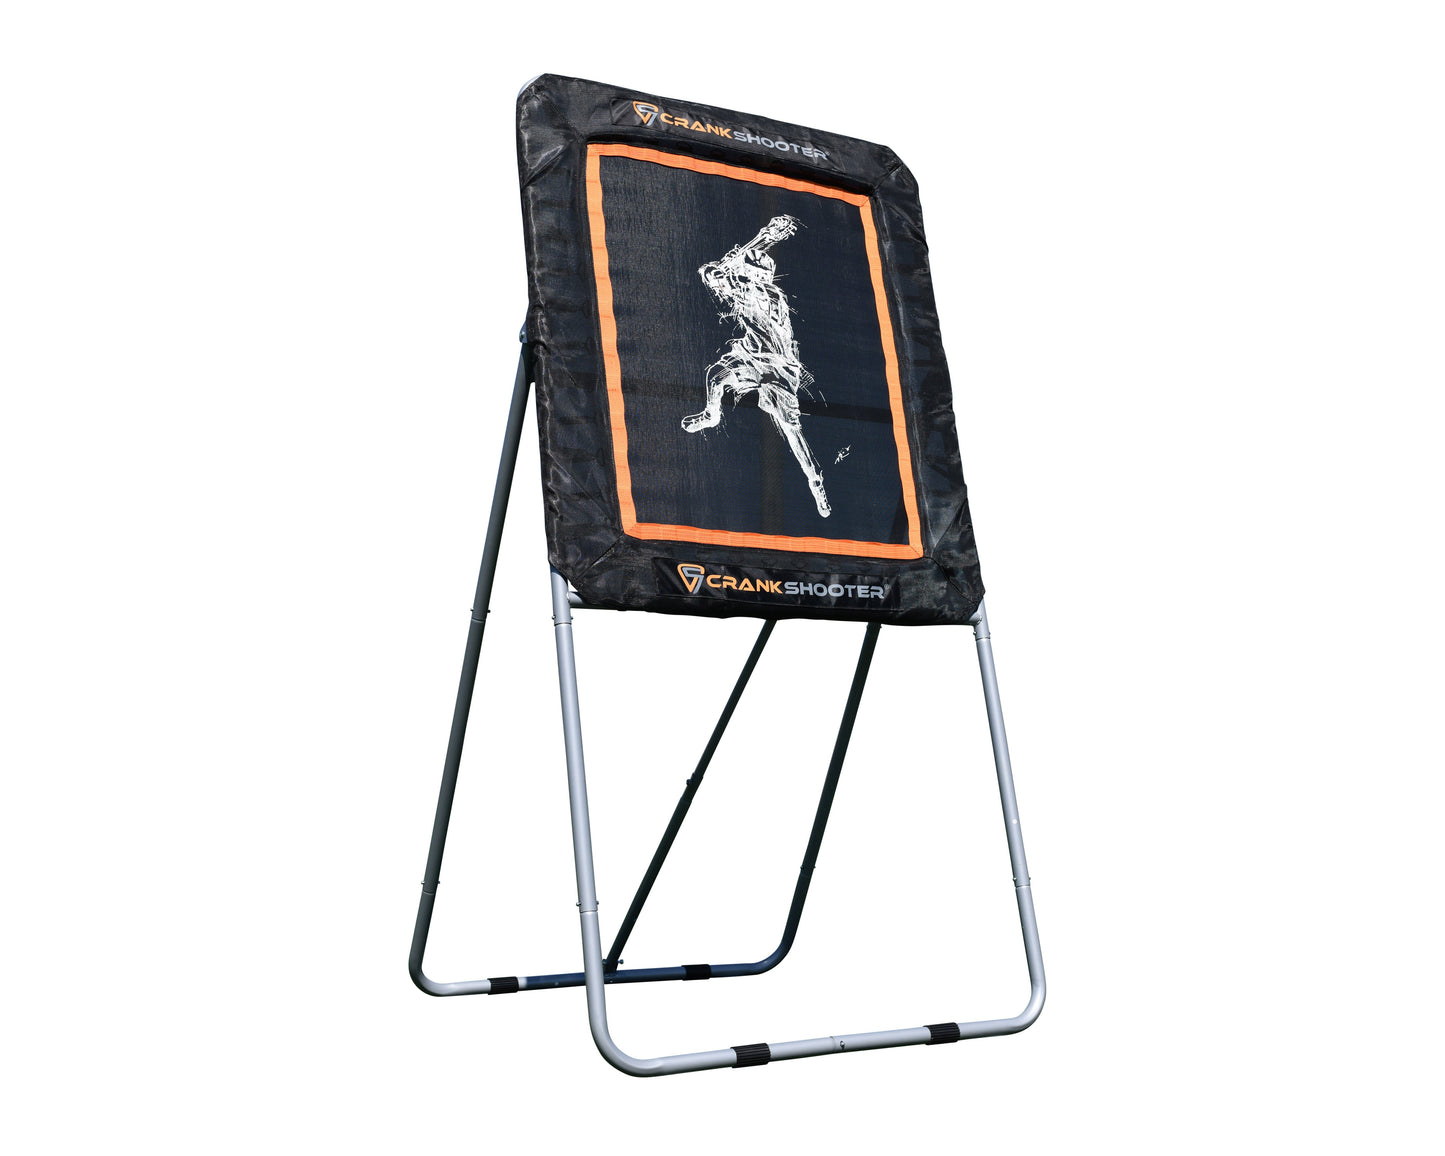 NEW! - Lacrosse Wall by CrankShooter® with weatherproof cover, featuring The Art Of Lax MALE Image (Introductory Price)